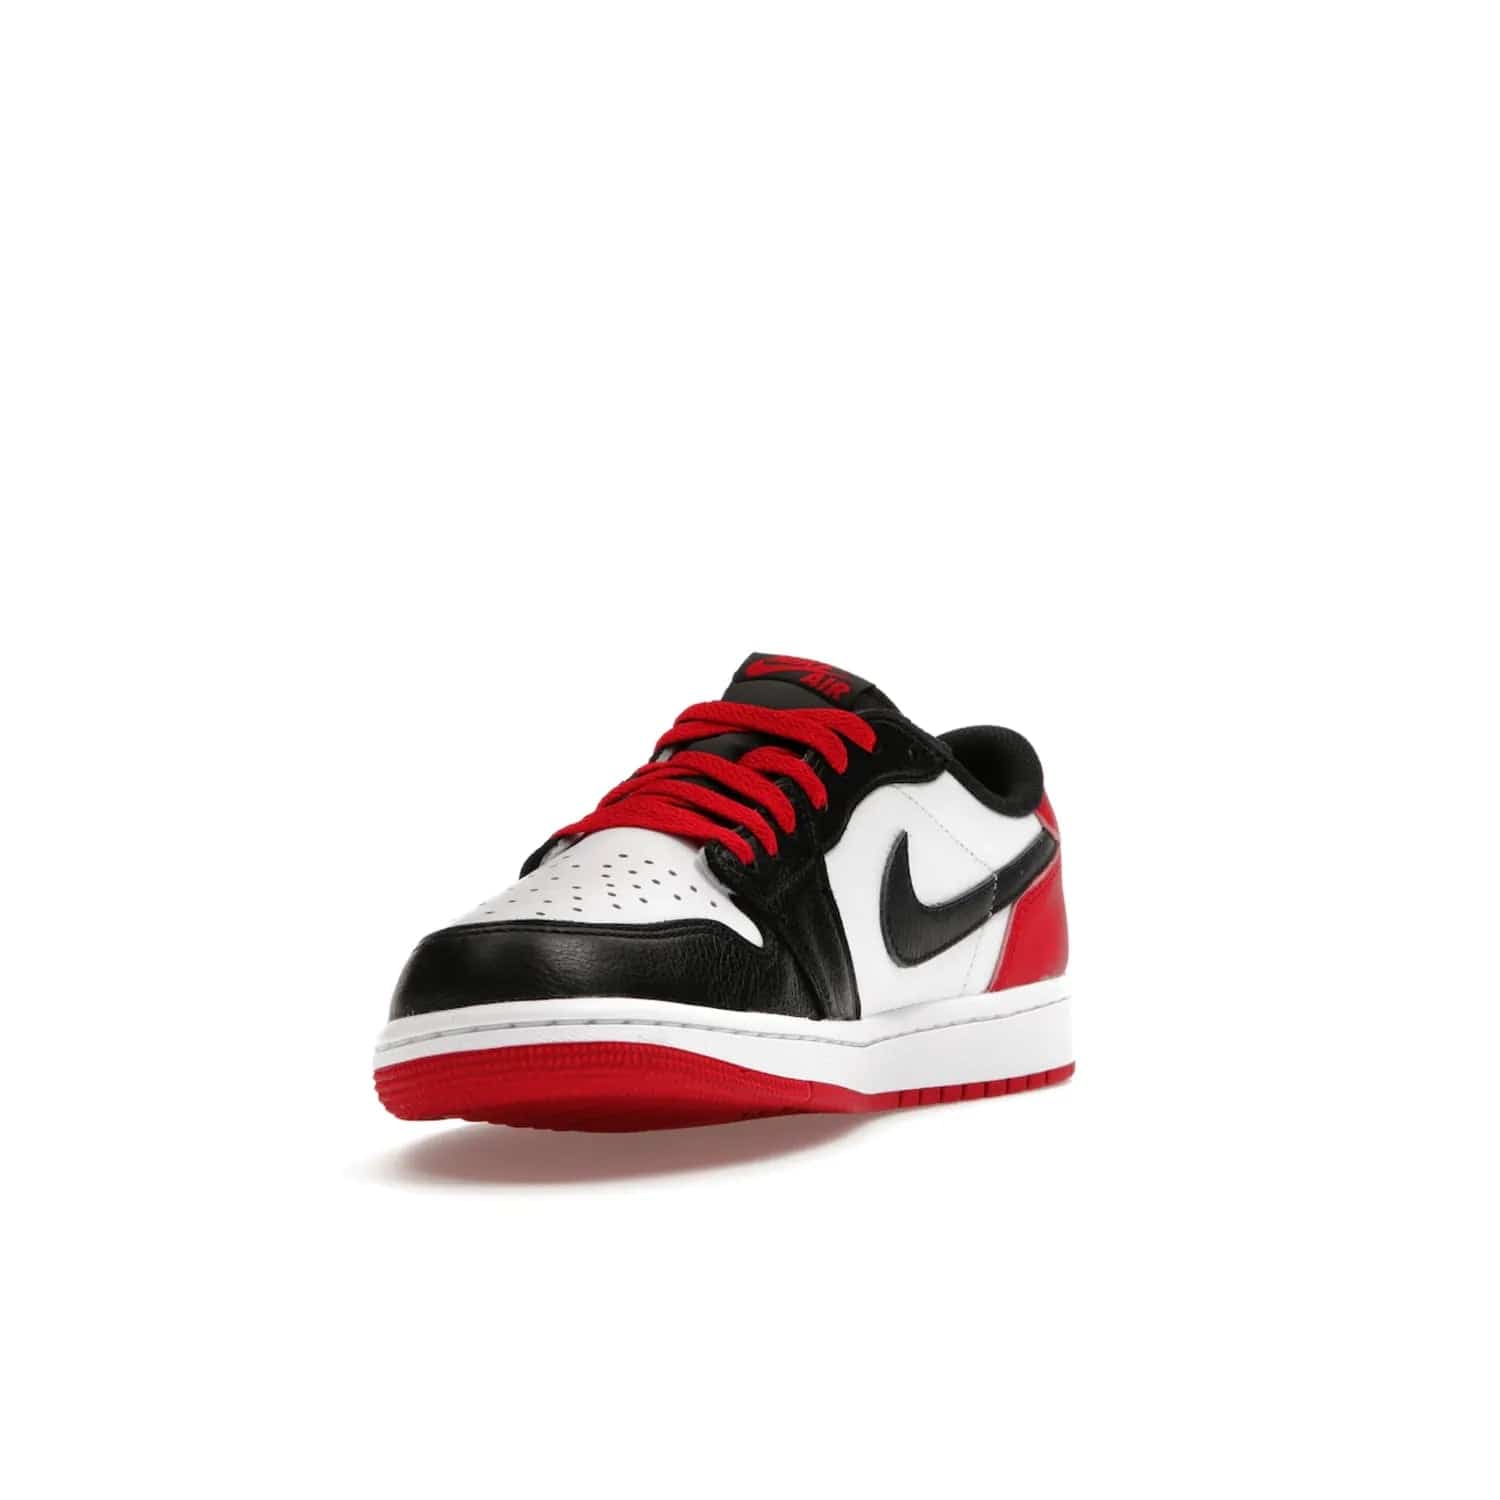 Jordan 1 Retro Low OG Black Toe (2023) - Image 13 - Only at www.BallersClubKickz.com - Upgrade your wardrobe with the Jordan 1 Retro Low OG Black Toe featuring a classic black and white upper and dynamic red heel counter. Eye-catching white midsole and iconic black Swoosh and Wings complete the timeless yet modern look. Shop now to own this iconic shoe!